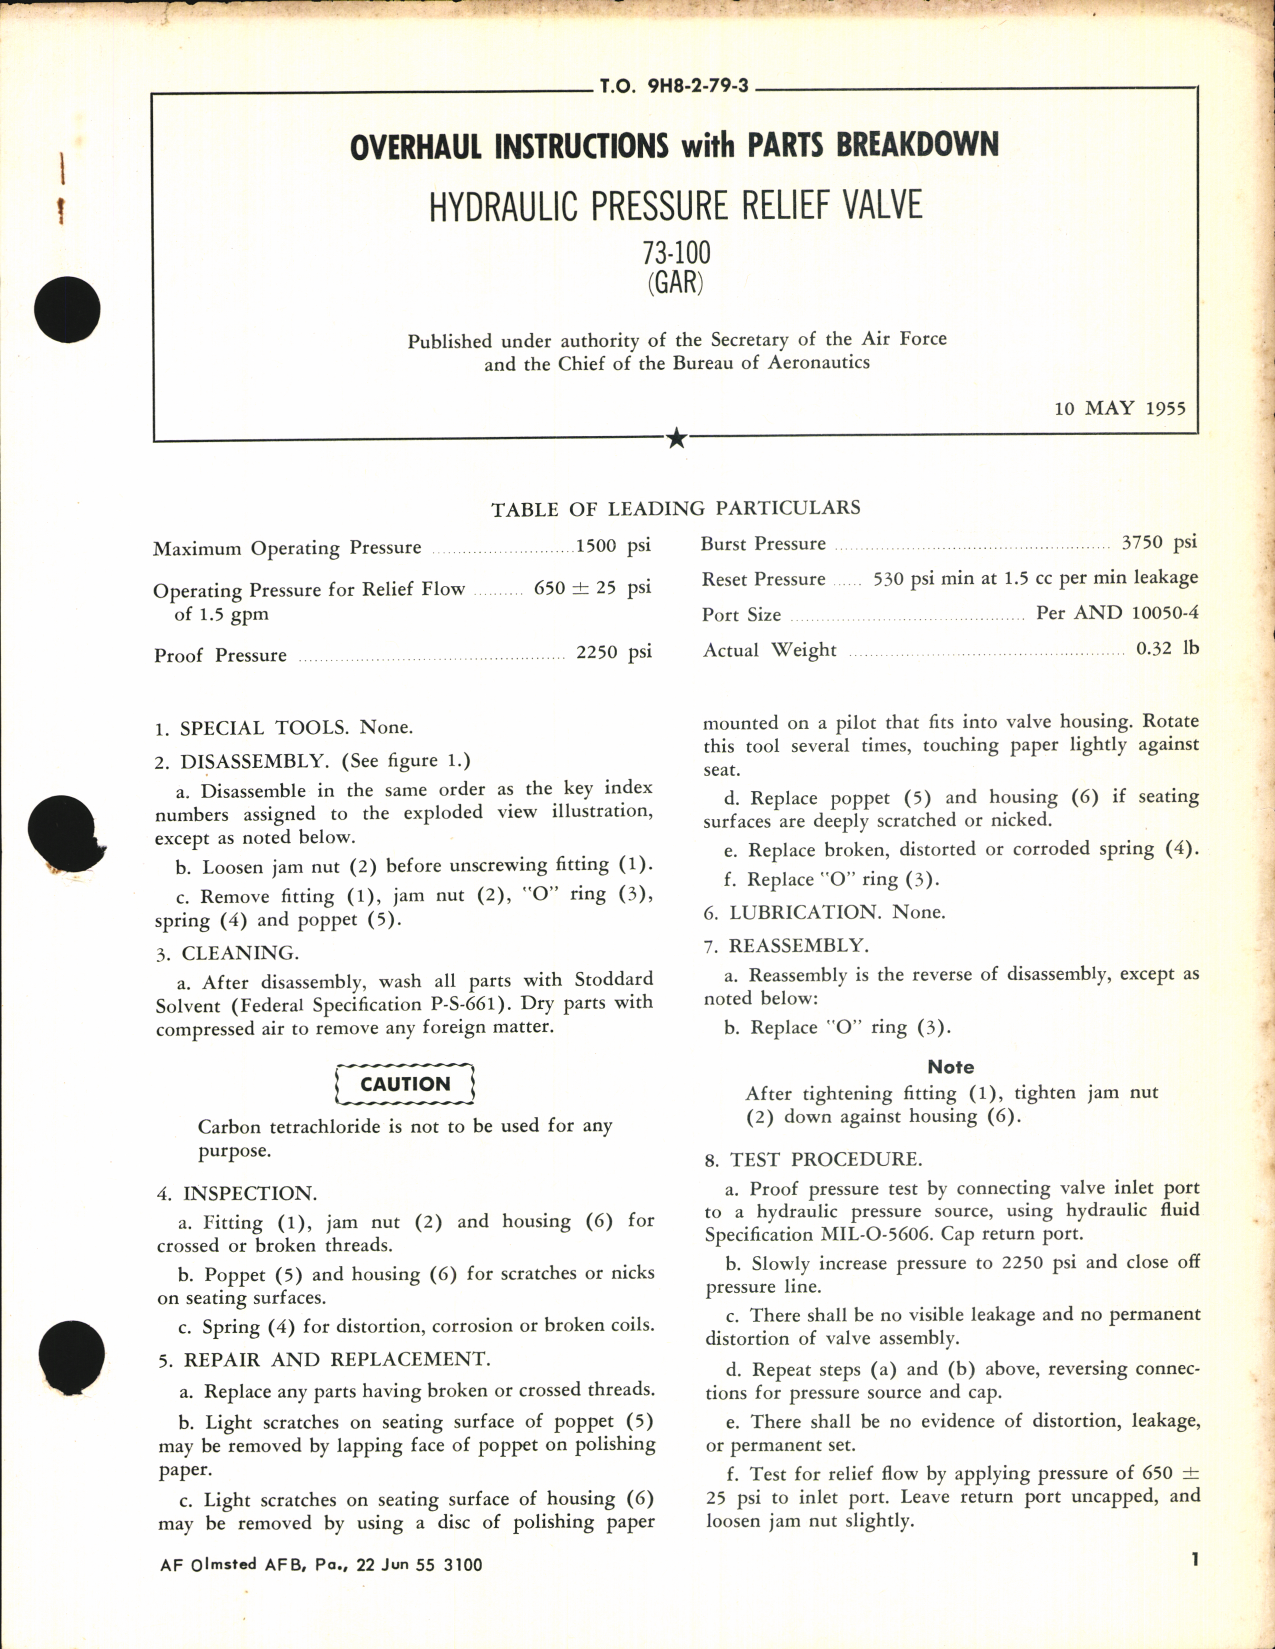 Sample page 1 from AirCorps Library document: Overhaul Instructions with Parts Breakdown for Hydraulic Pressure Relief Valve 73-100